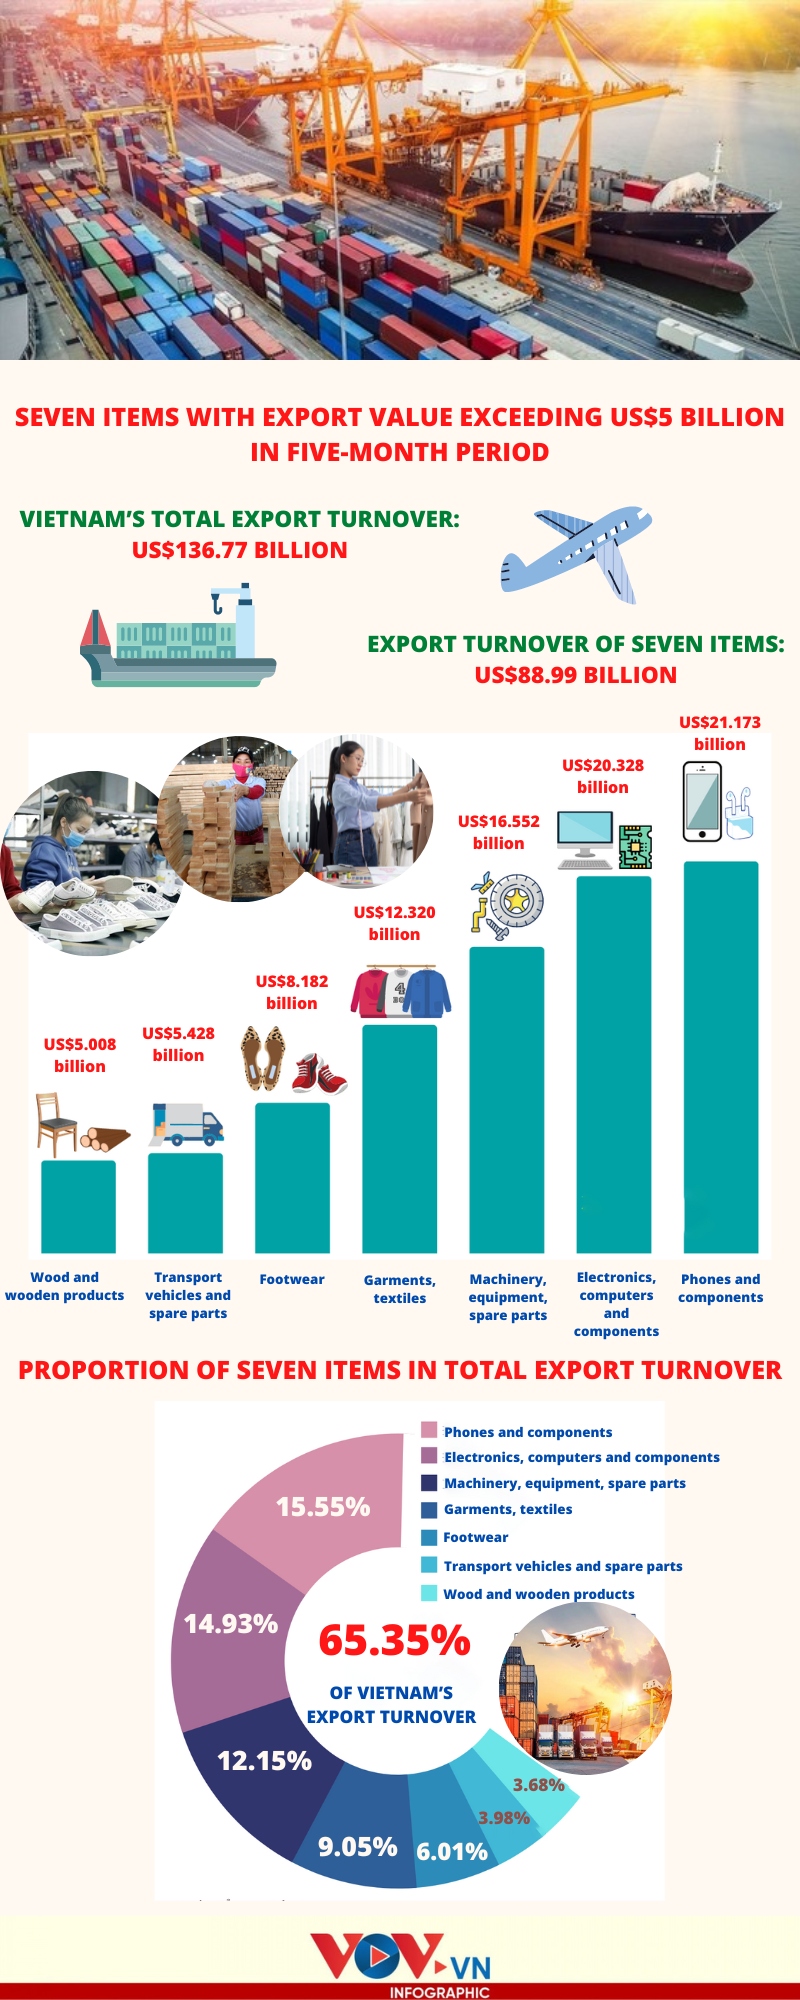 seven items record export turnover exceeding us 5 billion in five-month period picture 1